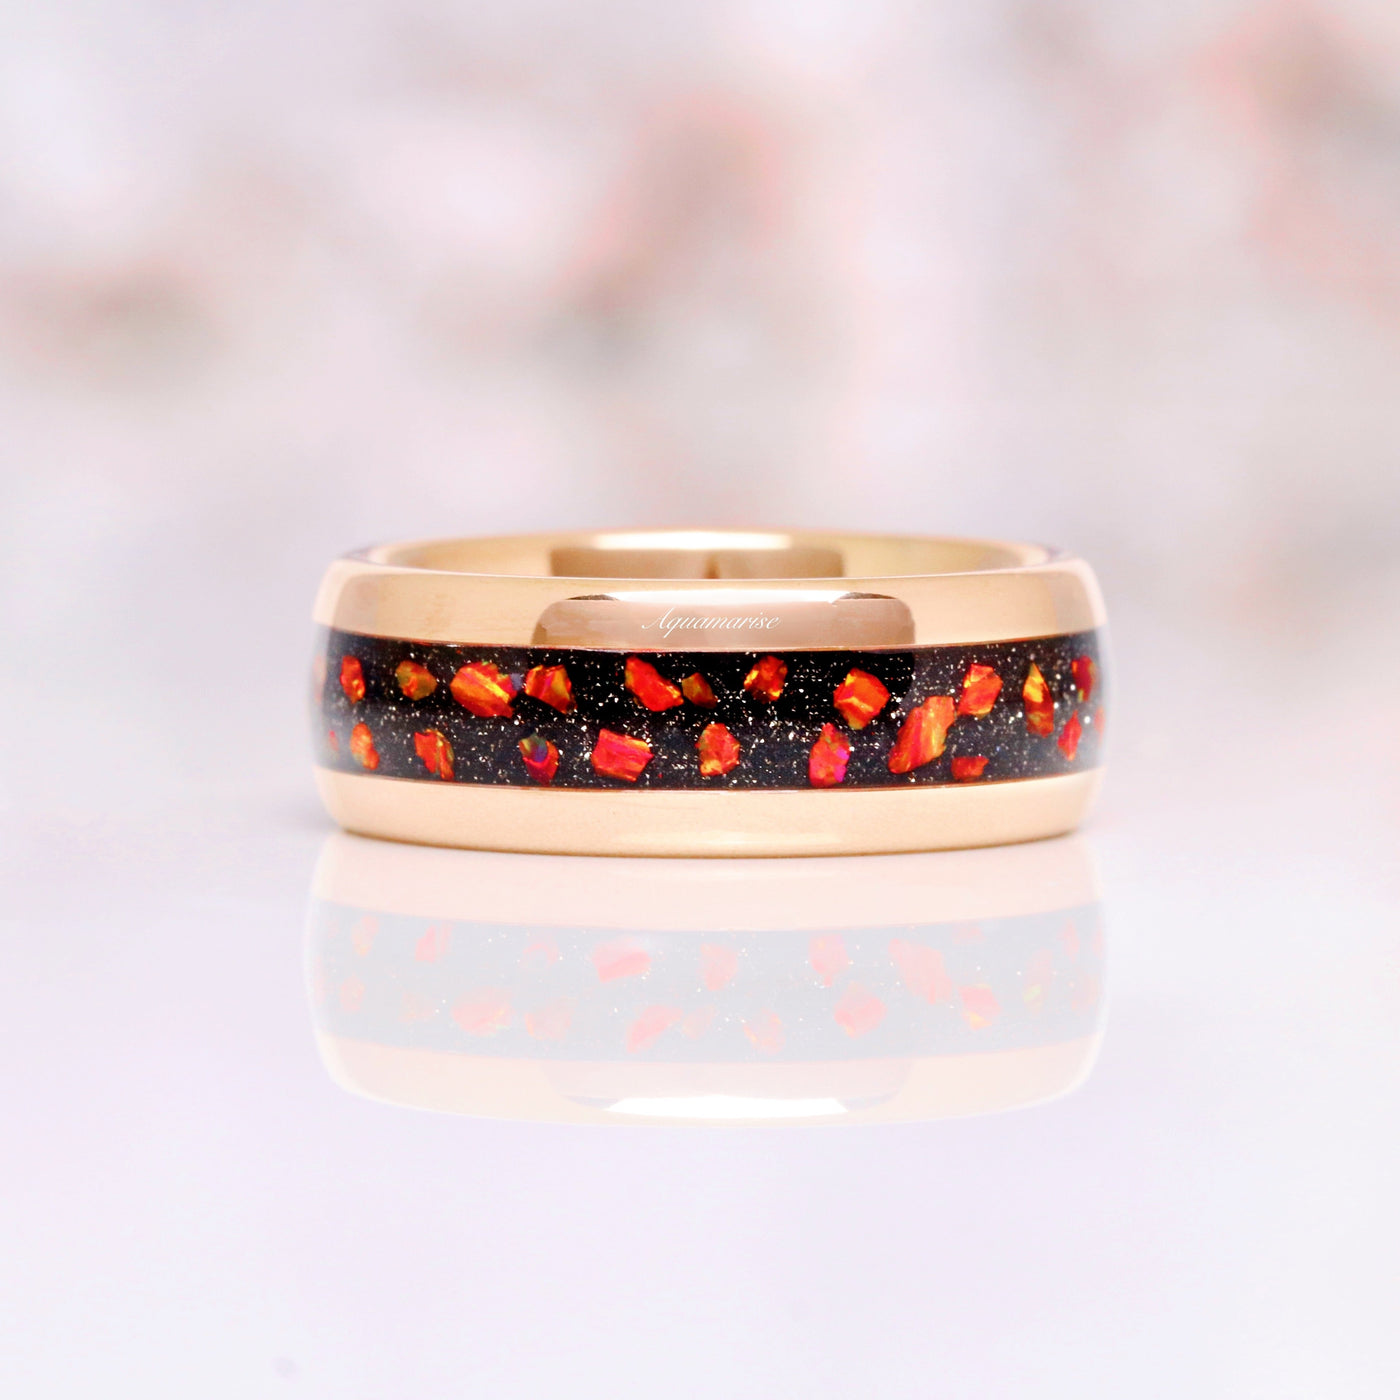 Red Fire Opal & Galaxy Sandstone Men's Wedding Band- Crushed Red Nebula 8mm Rose Gold Tungsten Wedding Ring Outer Space Unique Gift For Him